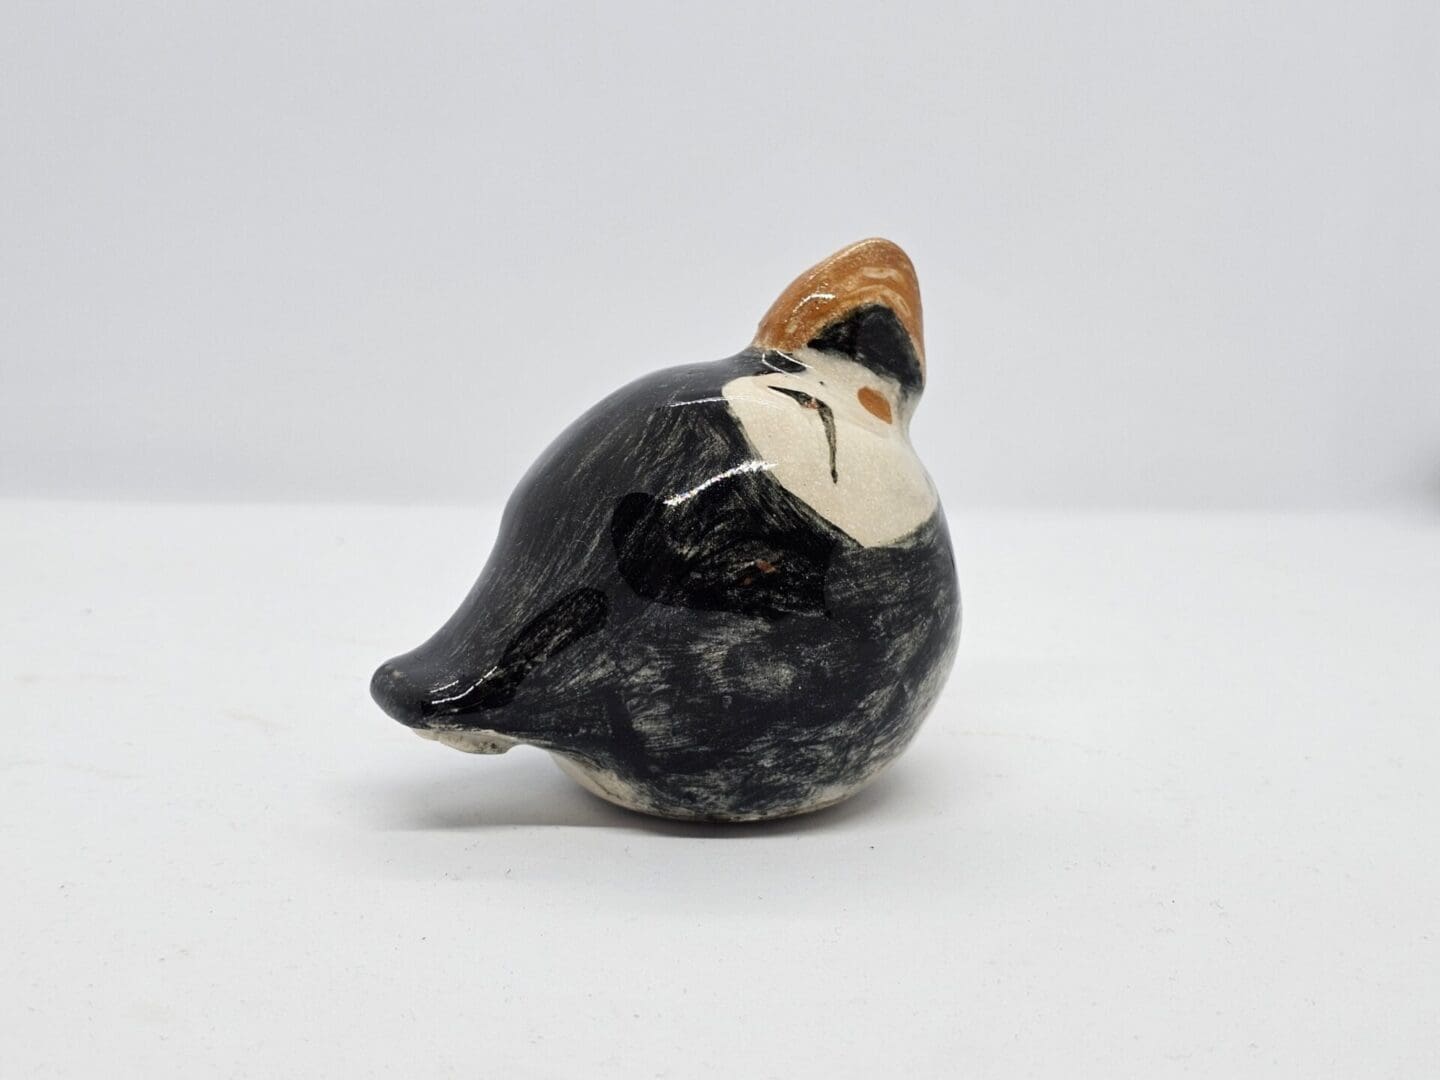 On a white background, a rear-right facing view of a ceramic puffin